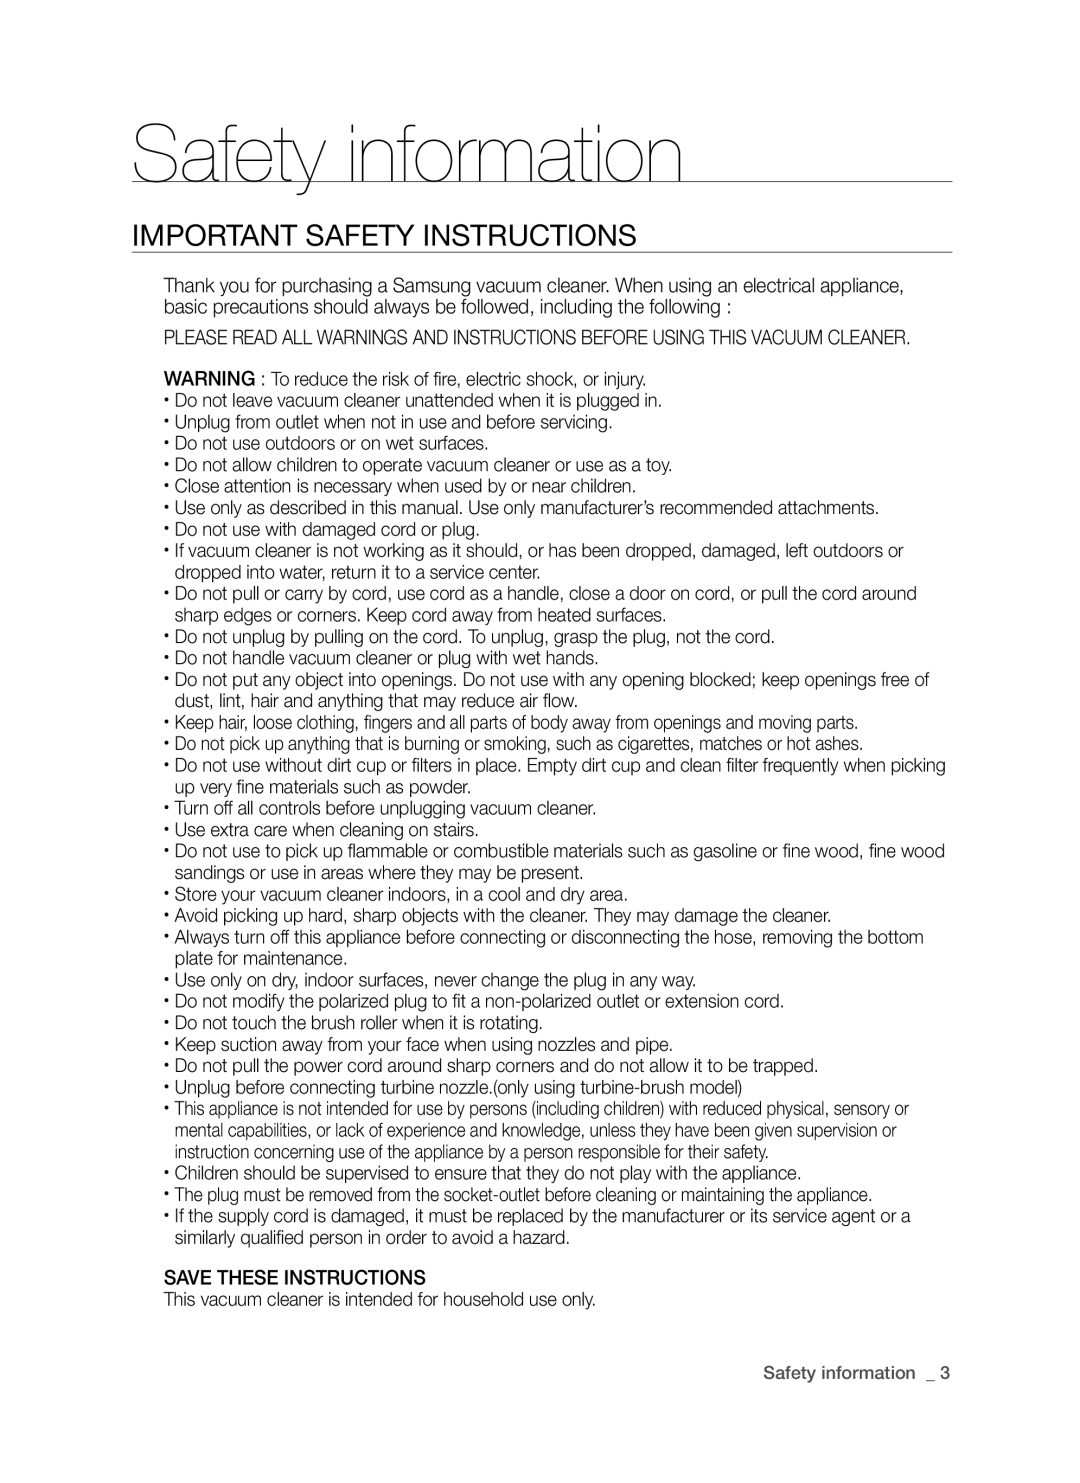 Samsung DJ68-00264B, SU9380 user manual IMpORTANT SAFETY INSTRucTIONS, Safety information, Save These Instructions 